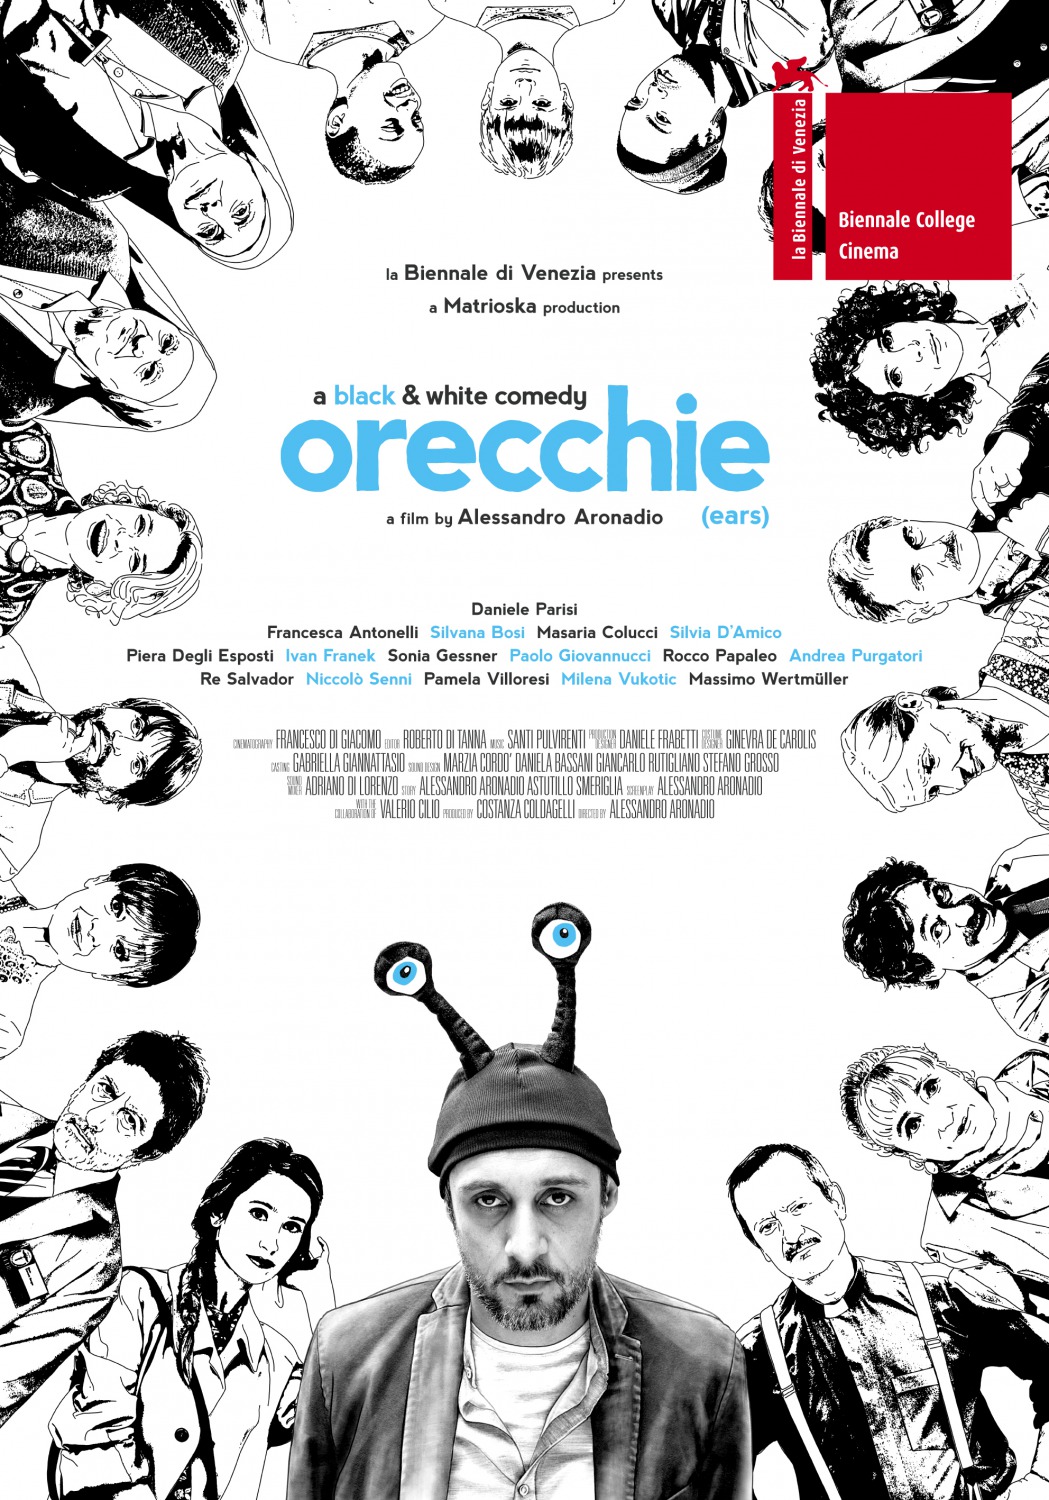 Extra Large Movie Poster Image for Orecchie (#2 of 2)